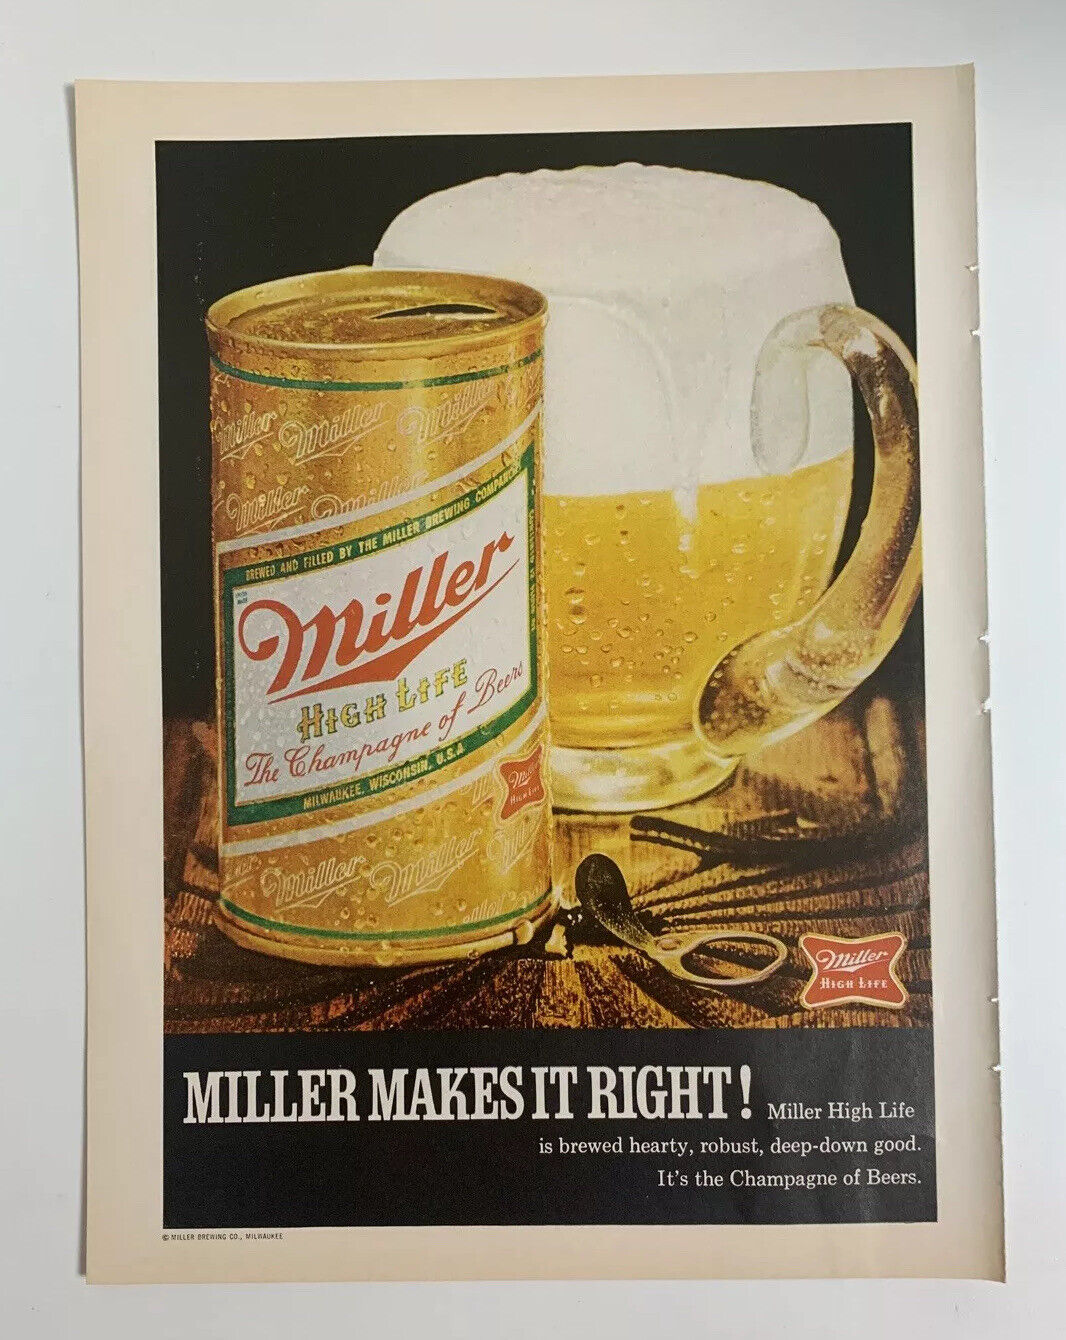 1970 Miller High Life Beer Print Ad Original Makes It Right Champagne Of Beers